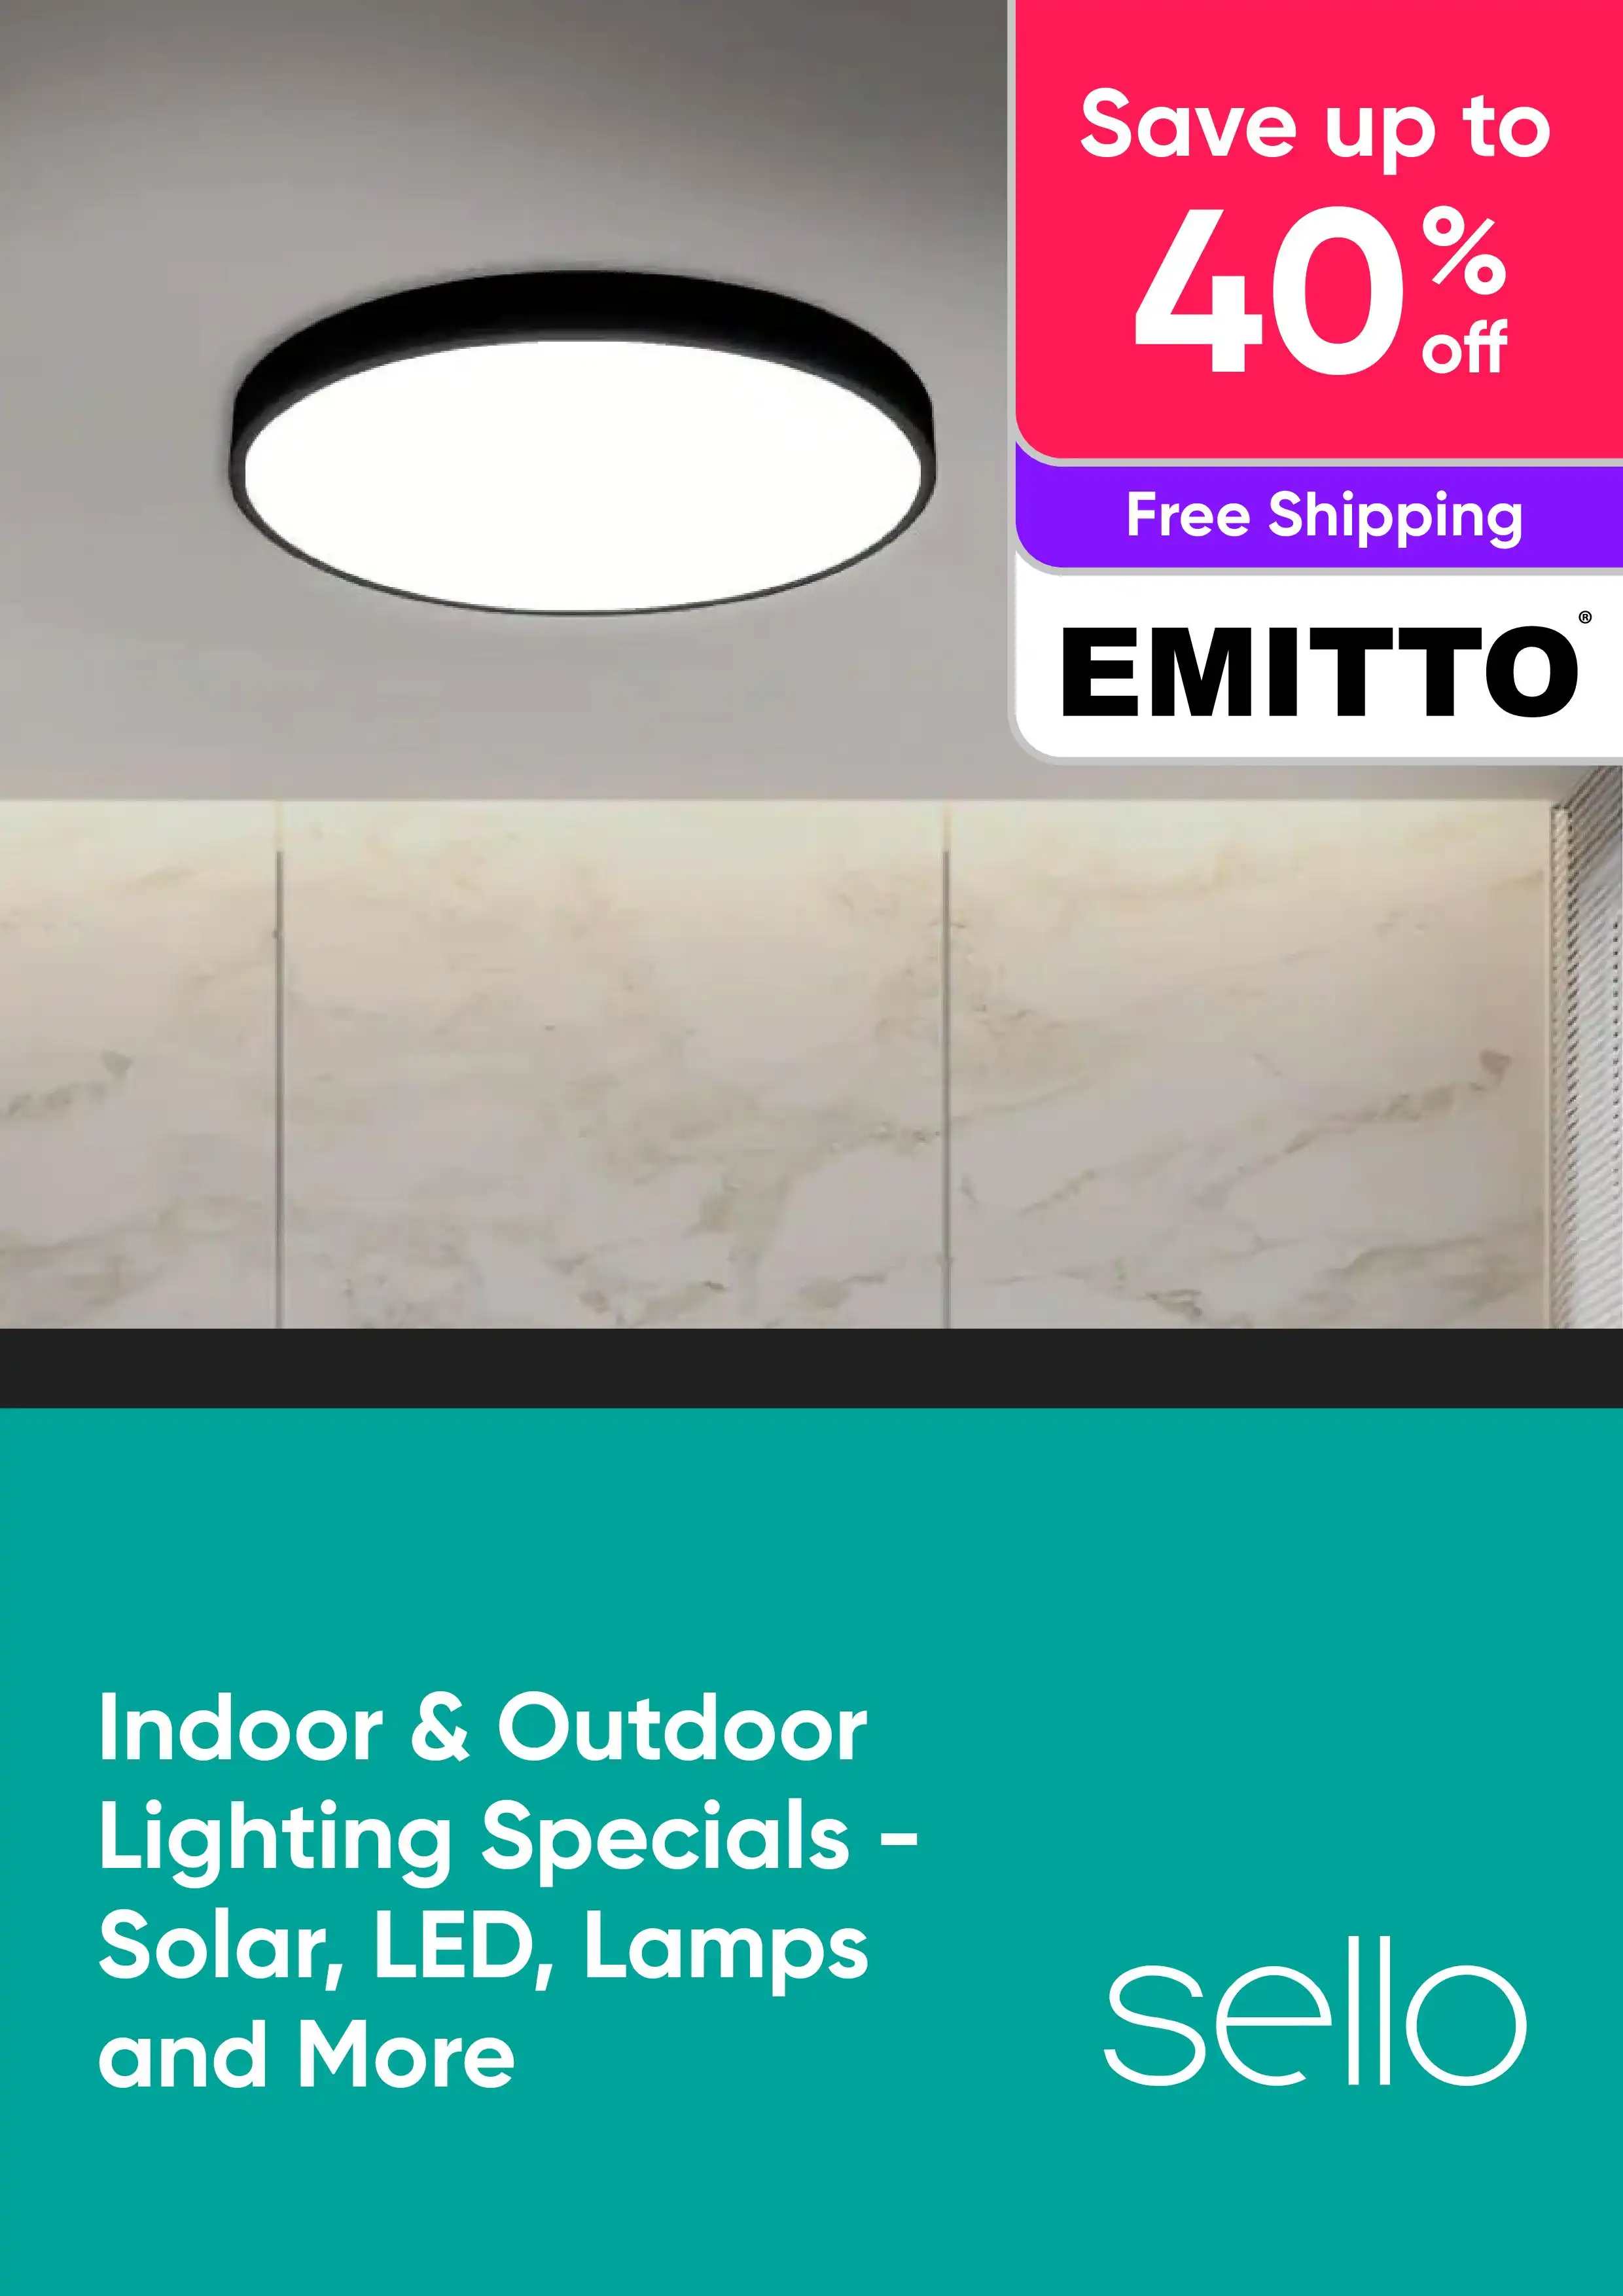 Indoor & Outdoor Lighting Specials - Solar, LED, Lamps and More - Emitto - Up to 40% Off